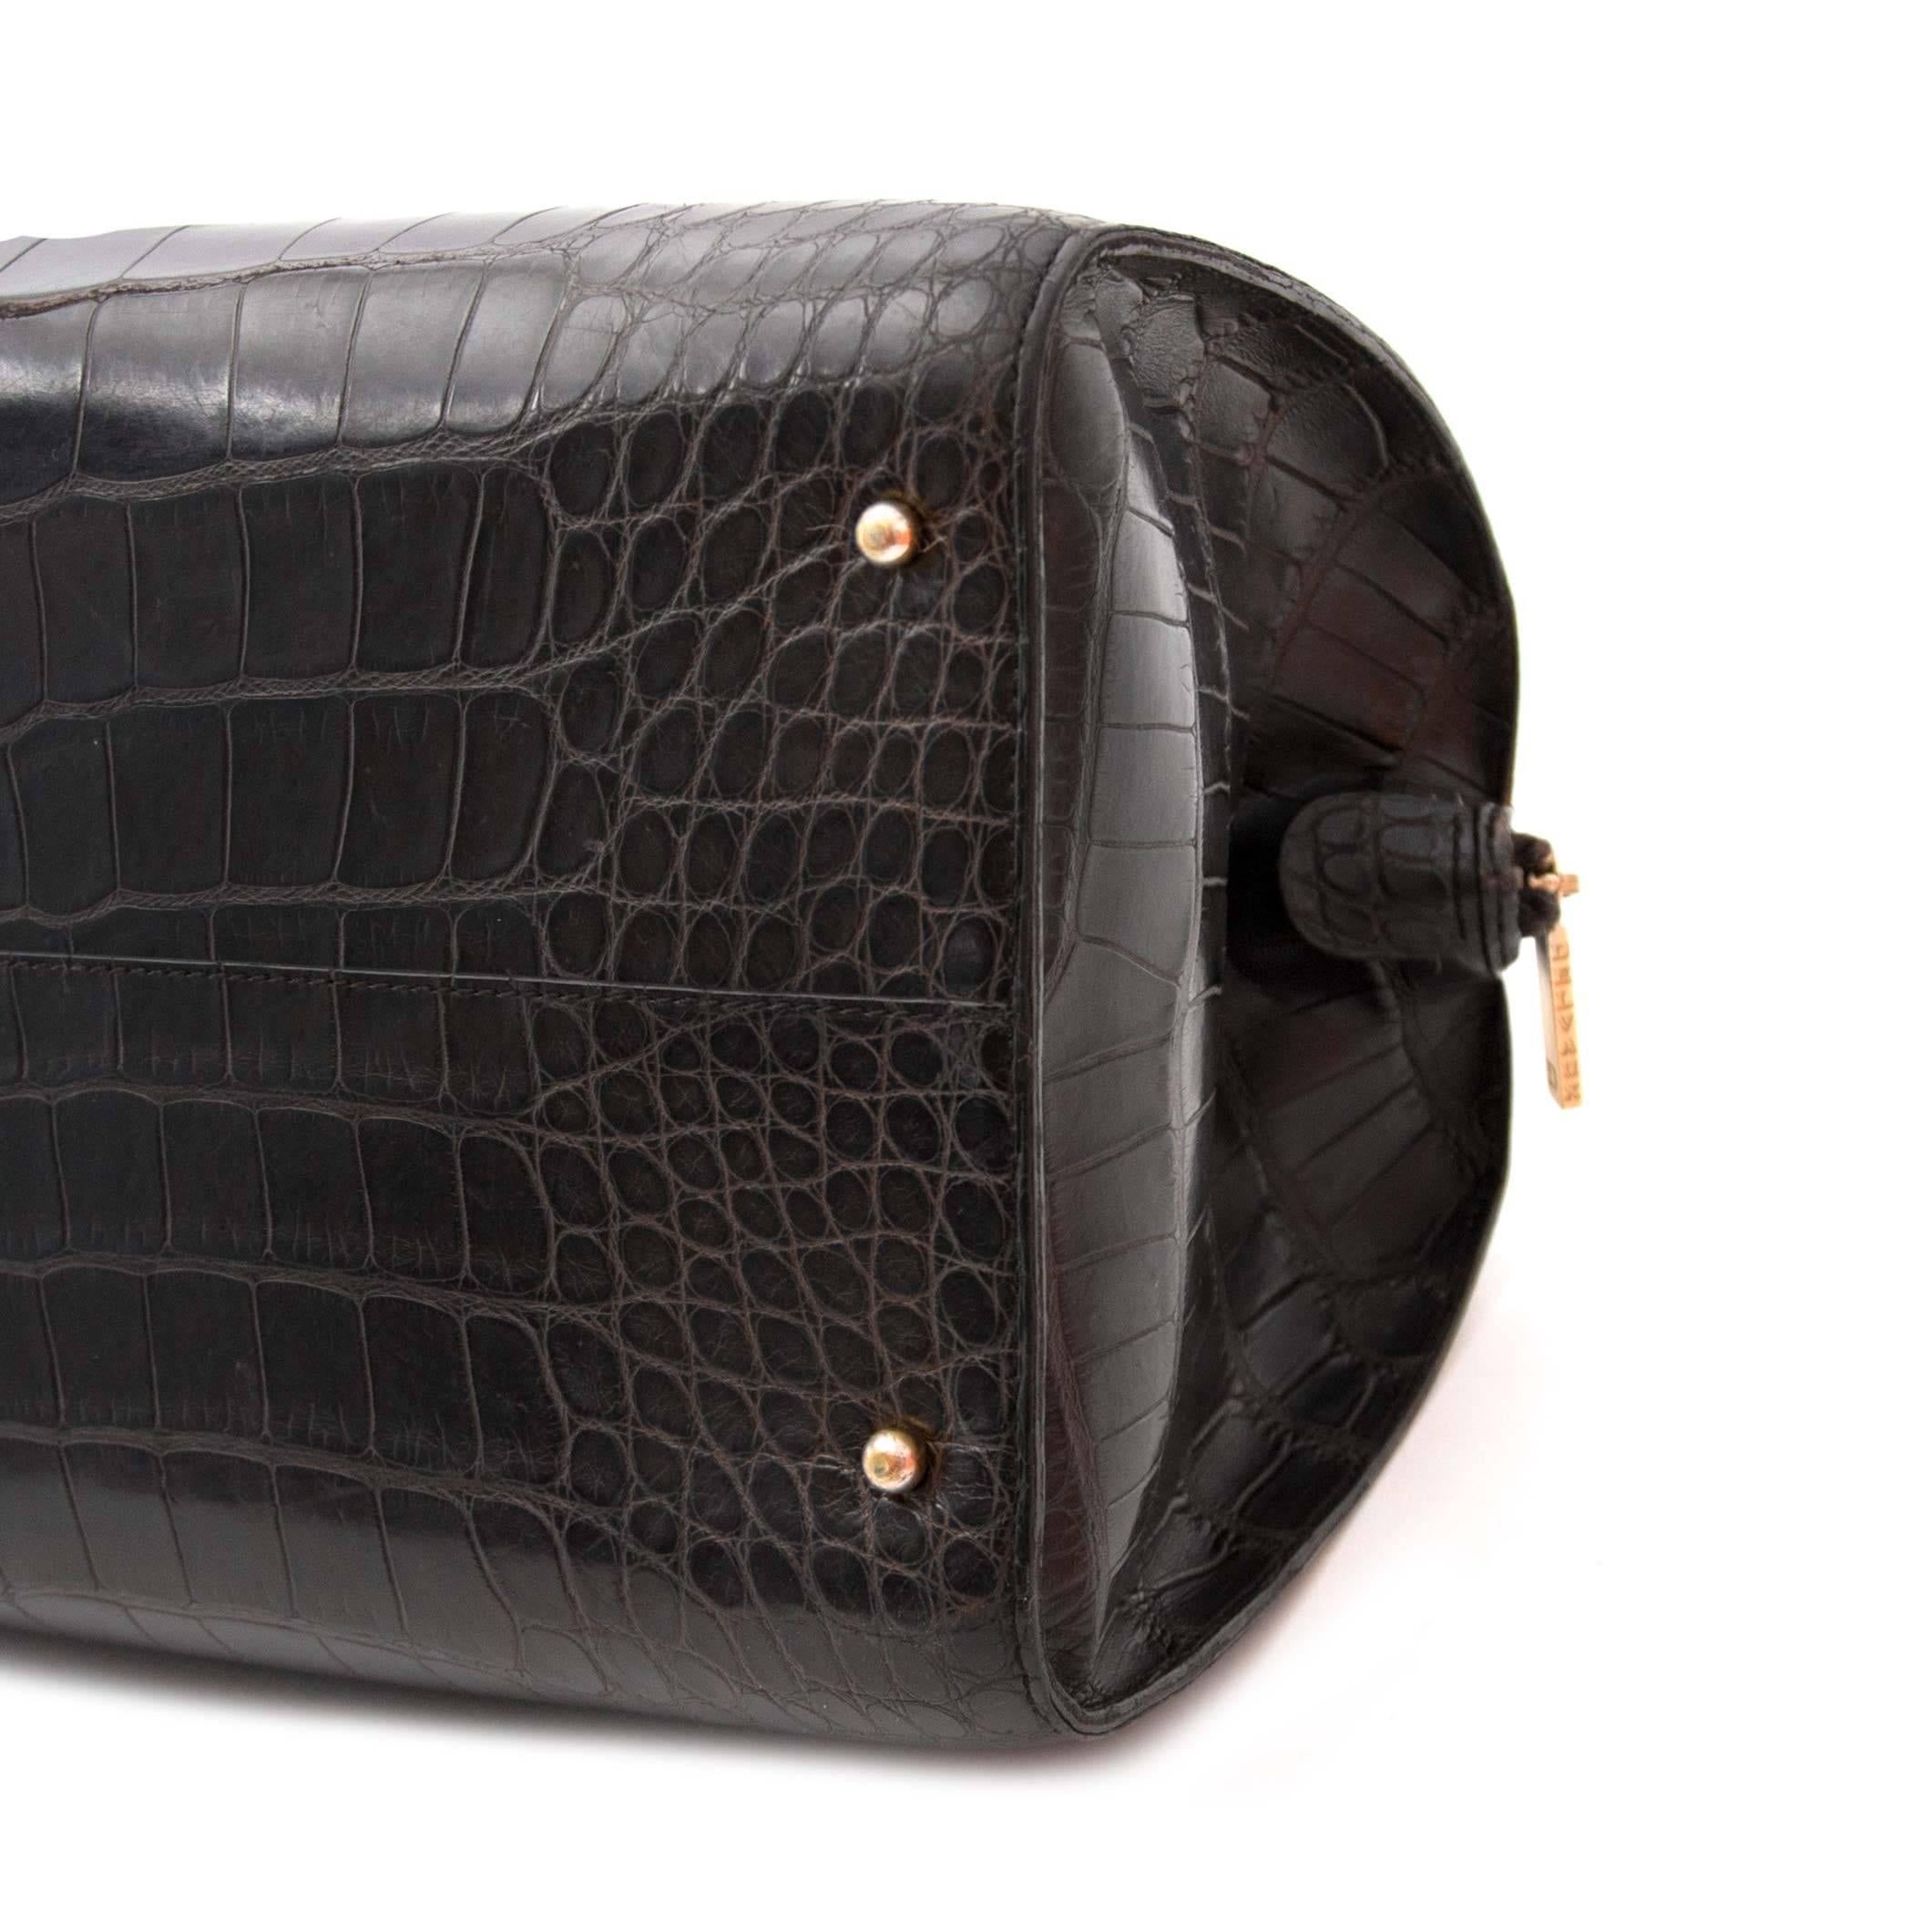 Delvaux Le Astrid Bag Croco In Excellent Condition For Sale In Antwerp, BE